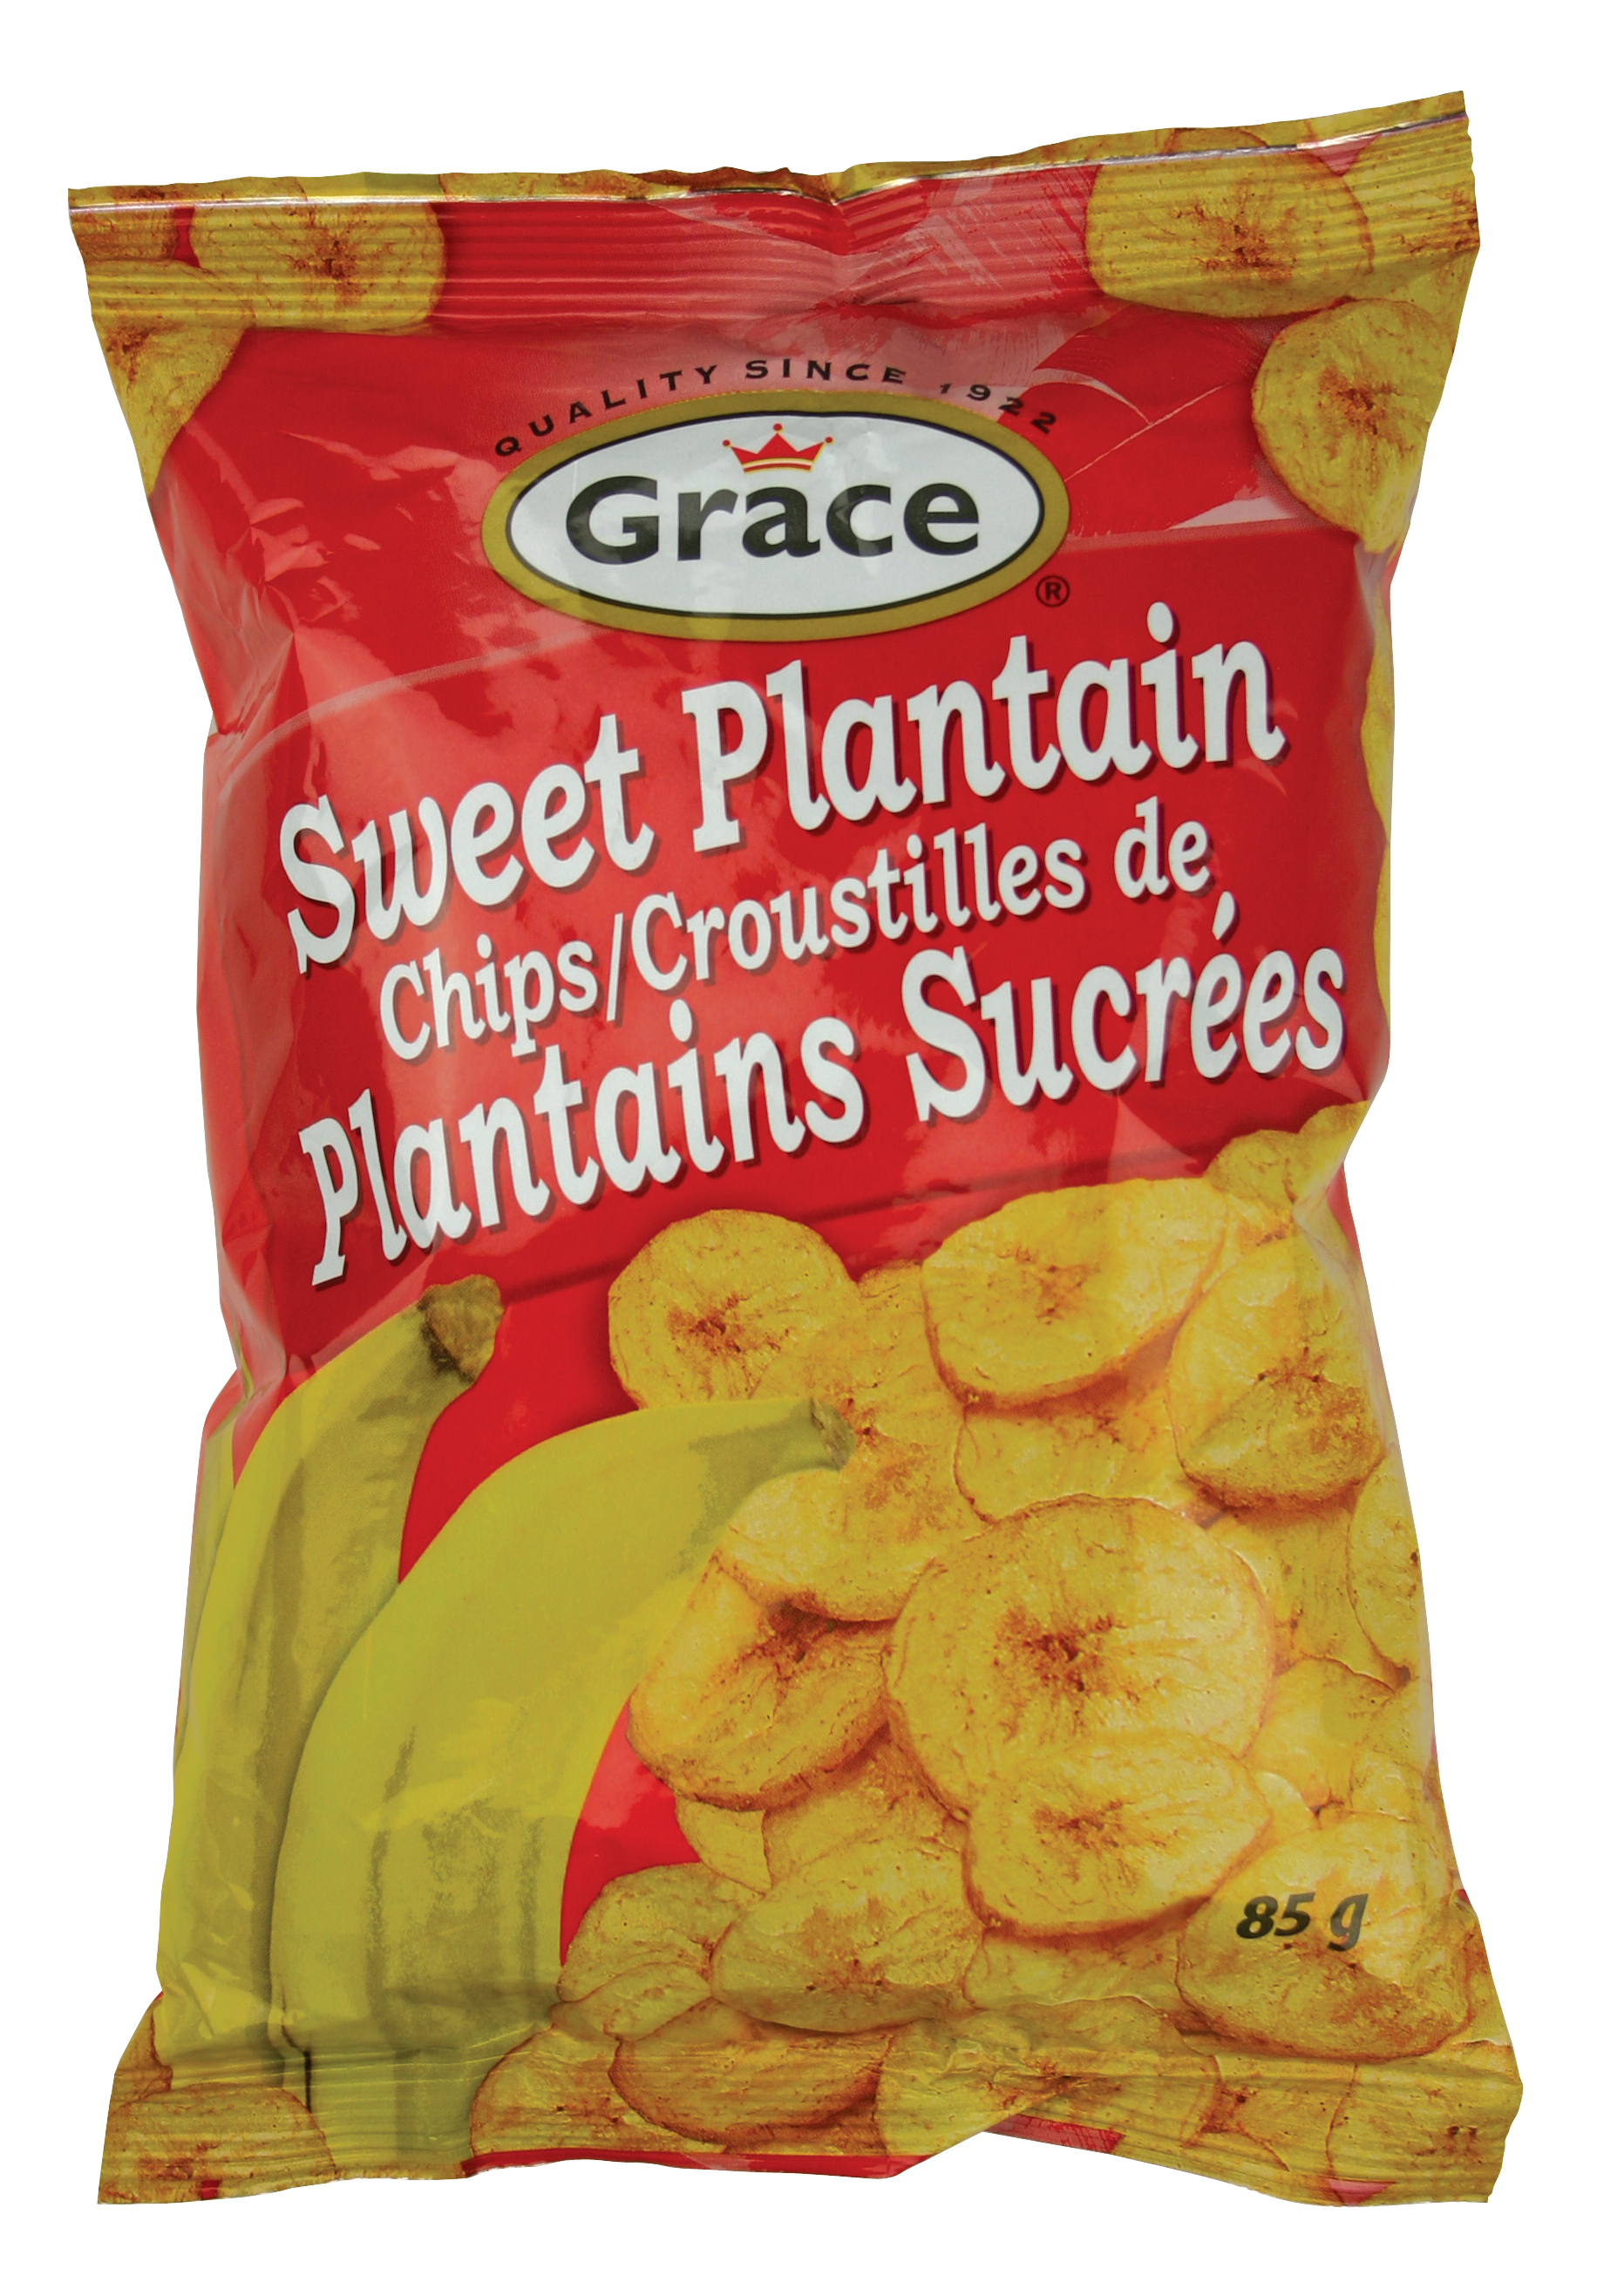 grace sweetplantain chips2